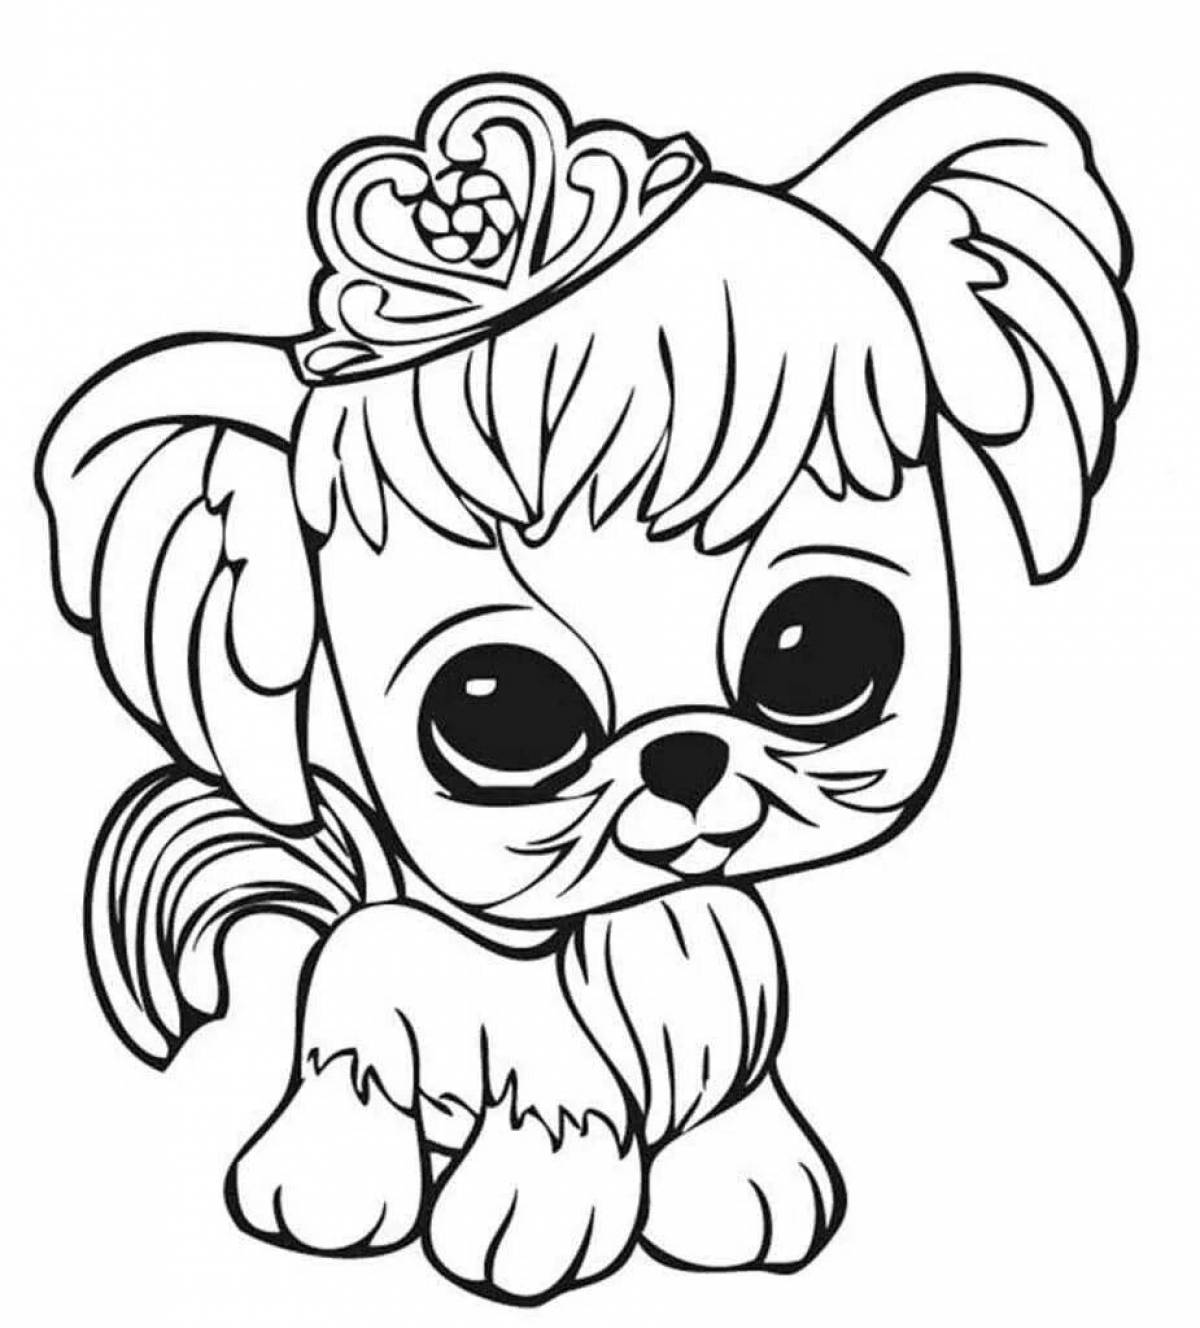 Coloring page happy cute dog